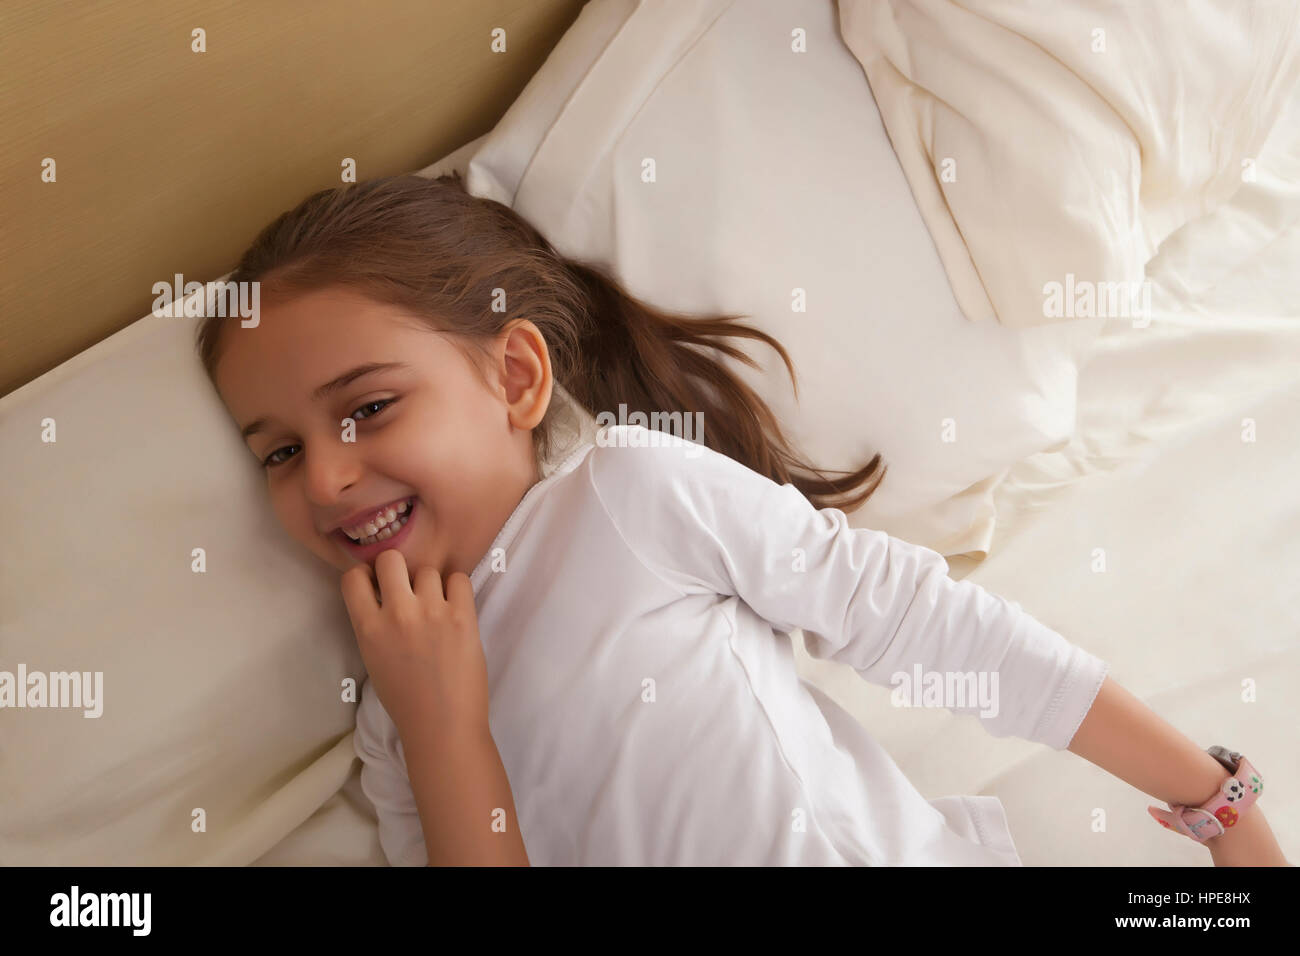 Portrait of girl lying in bed Stock Photo